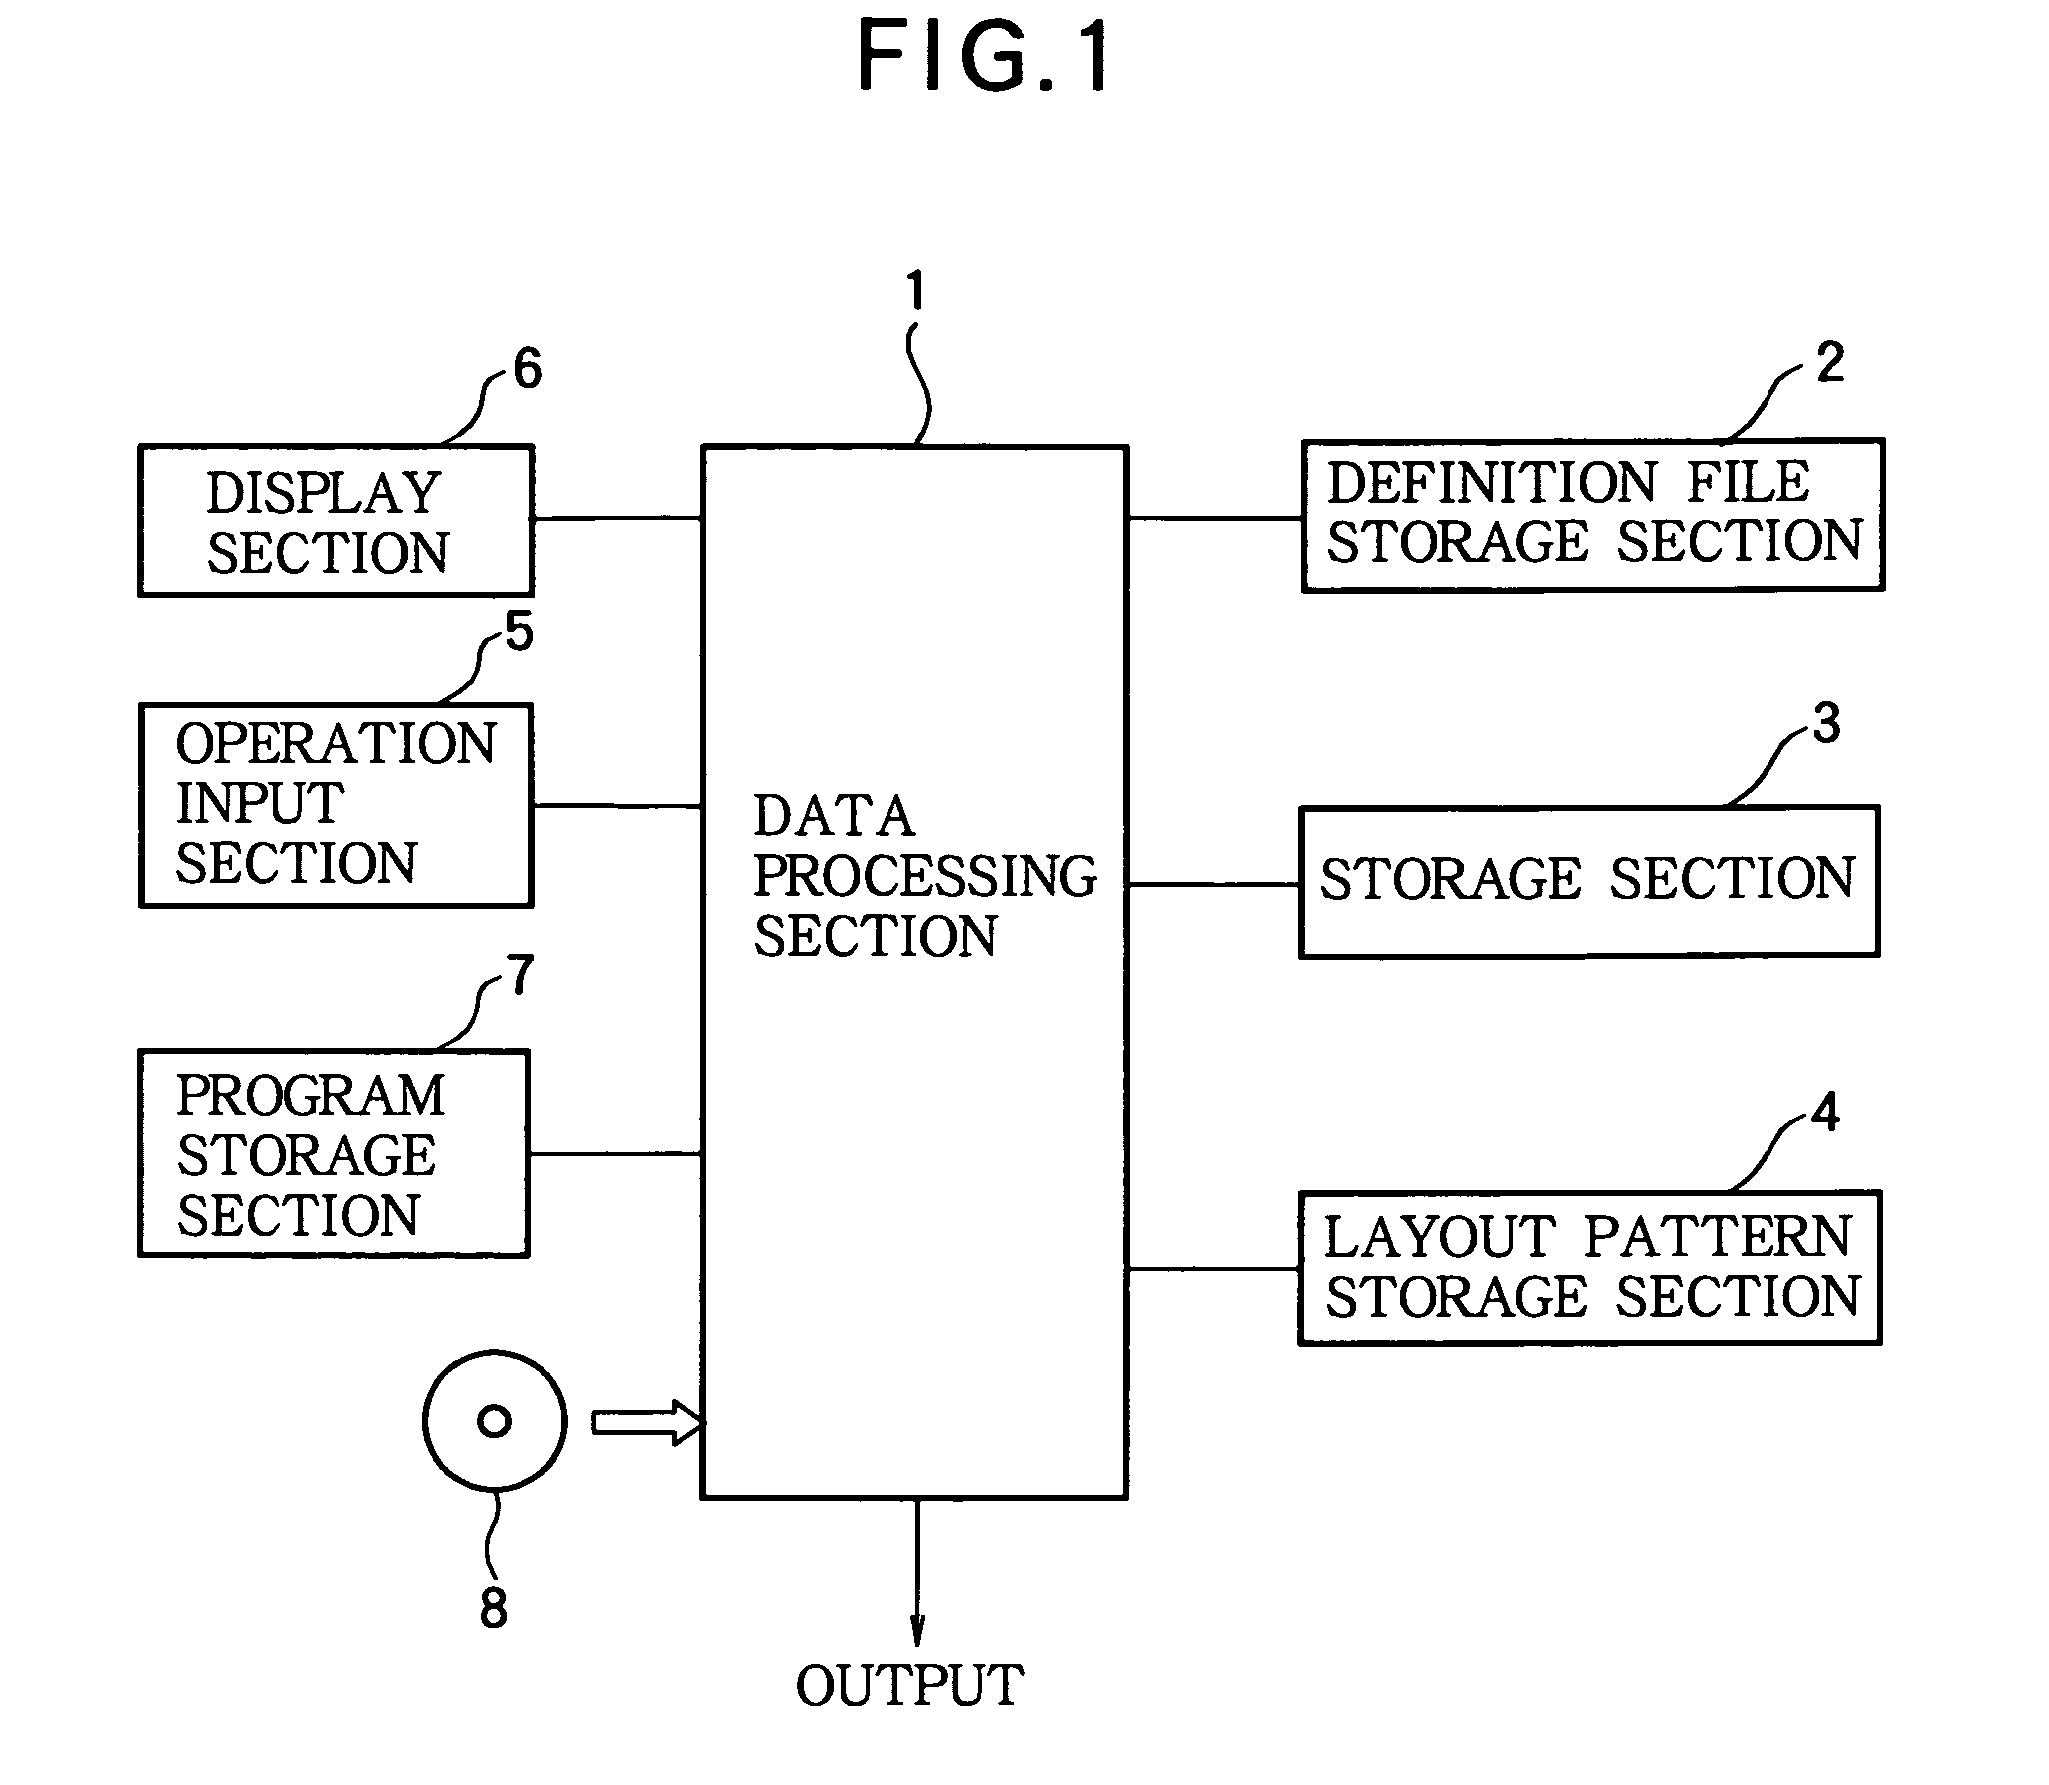 Method and apparatus for generating layout pattern